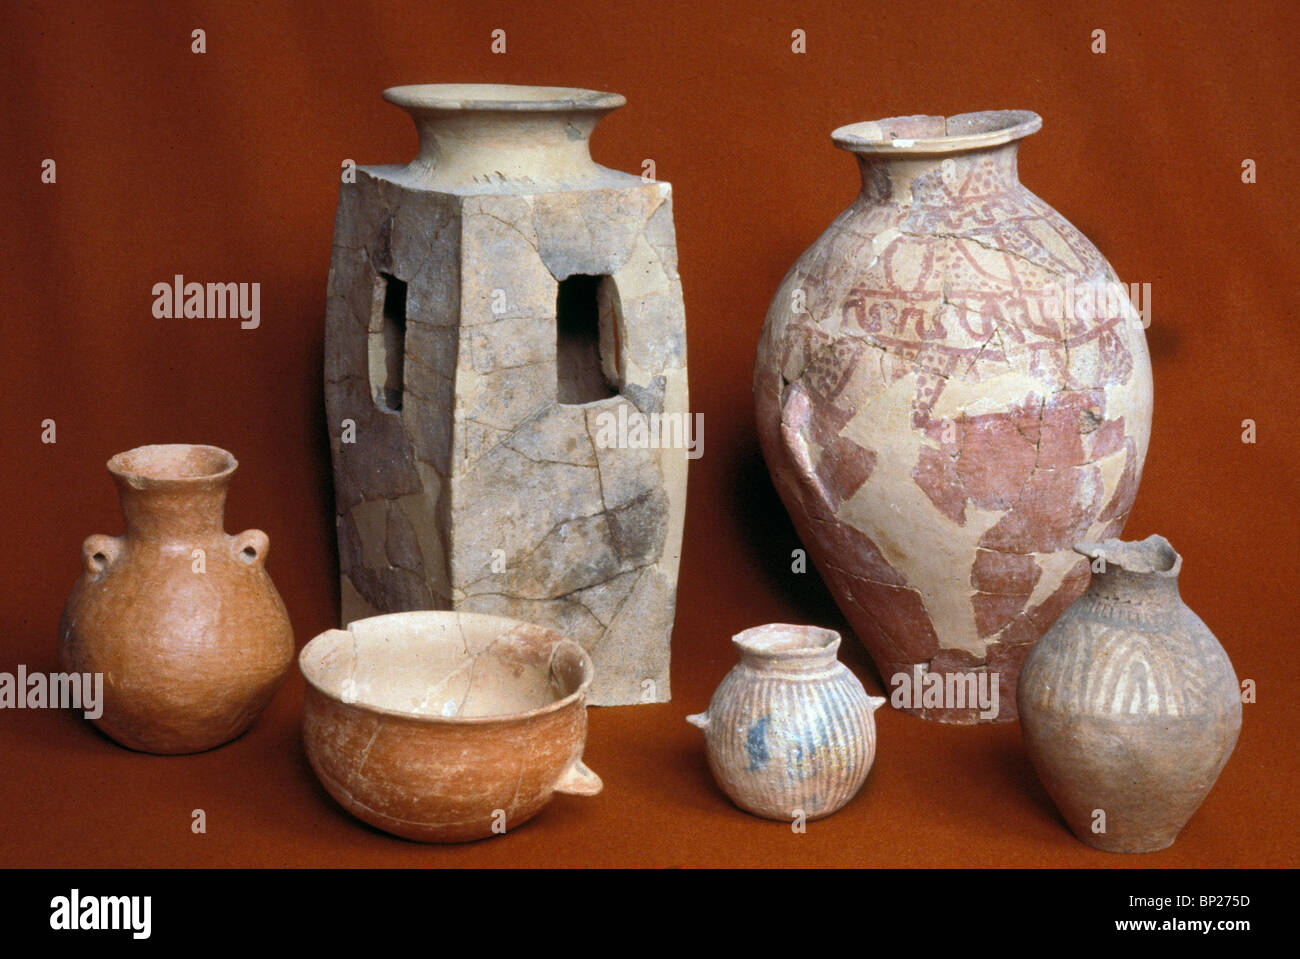 1479. CNAANITE POTTERY DATING FROM 18TH - 15TH. C. B.C. Stock Photo